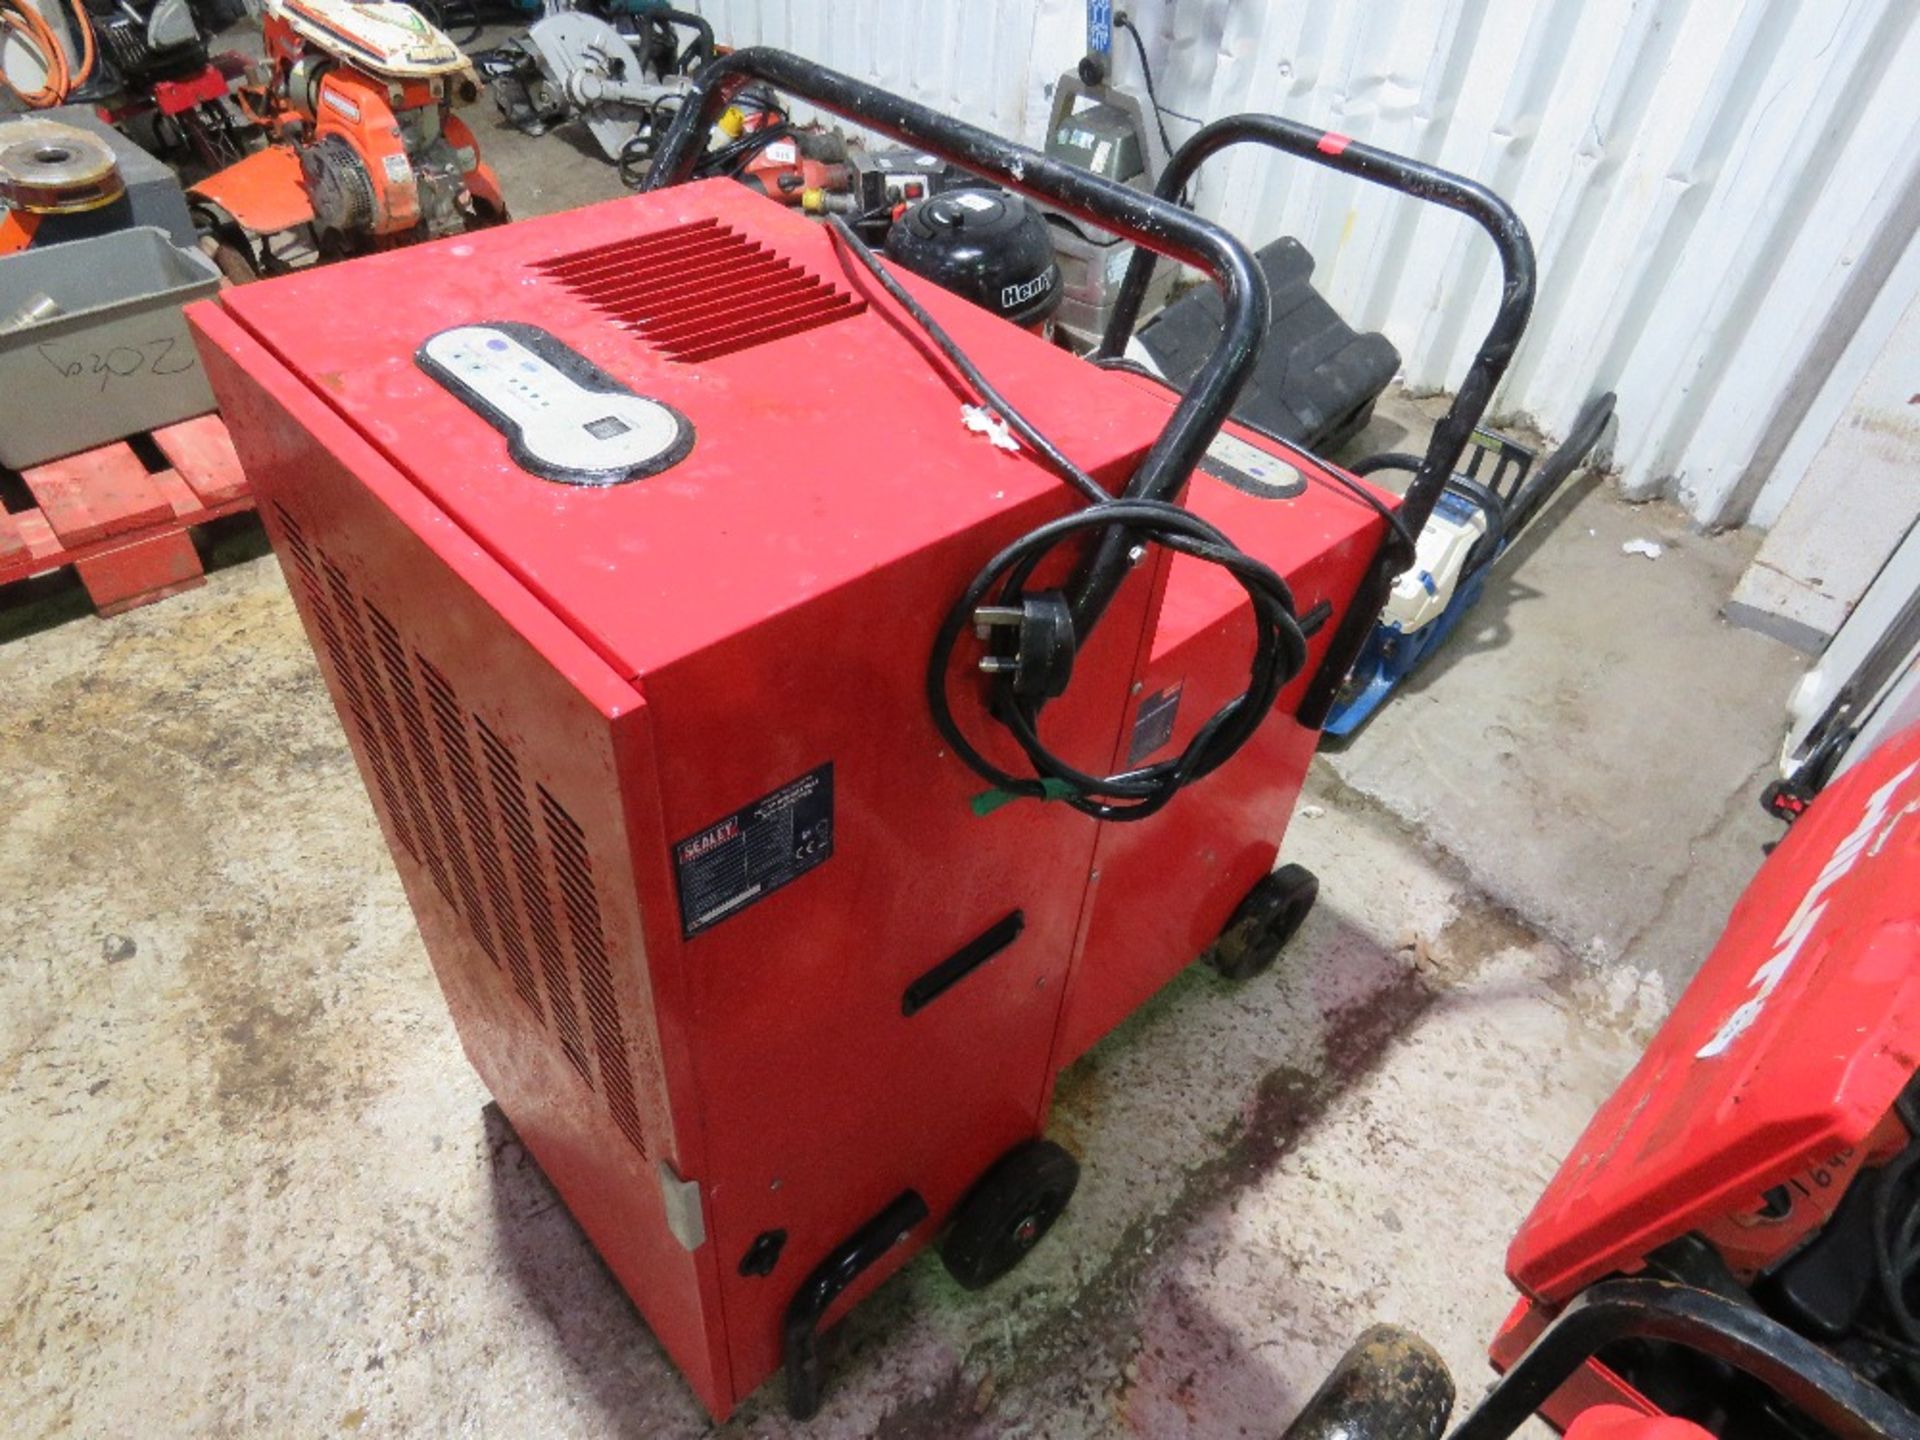 2 X SEALEY RED COLOURED DEHUMIDIFIERS, 240VOLT POWERED. THIS LOT IS SOLD UNDER THE AUCTIONEERS MA - Image 2 of 5